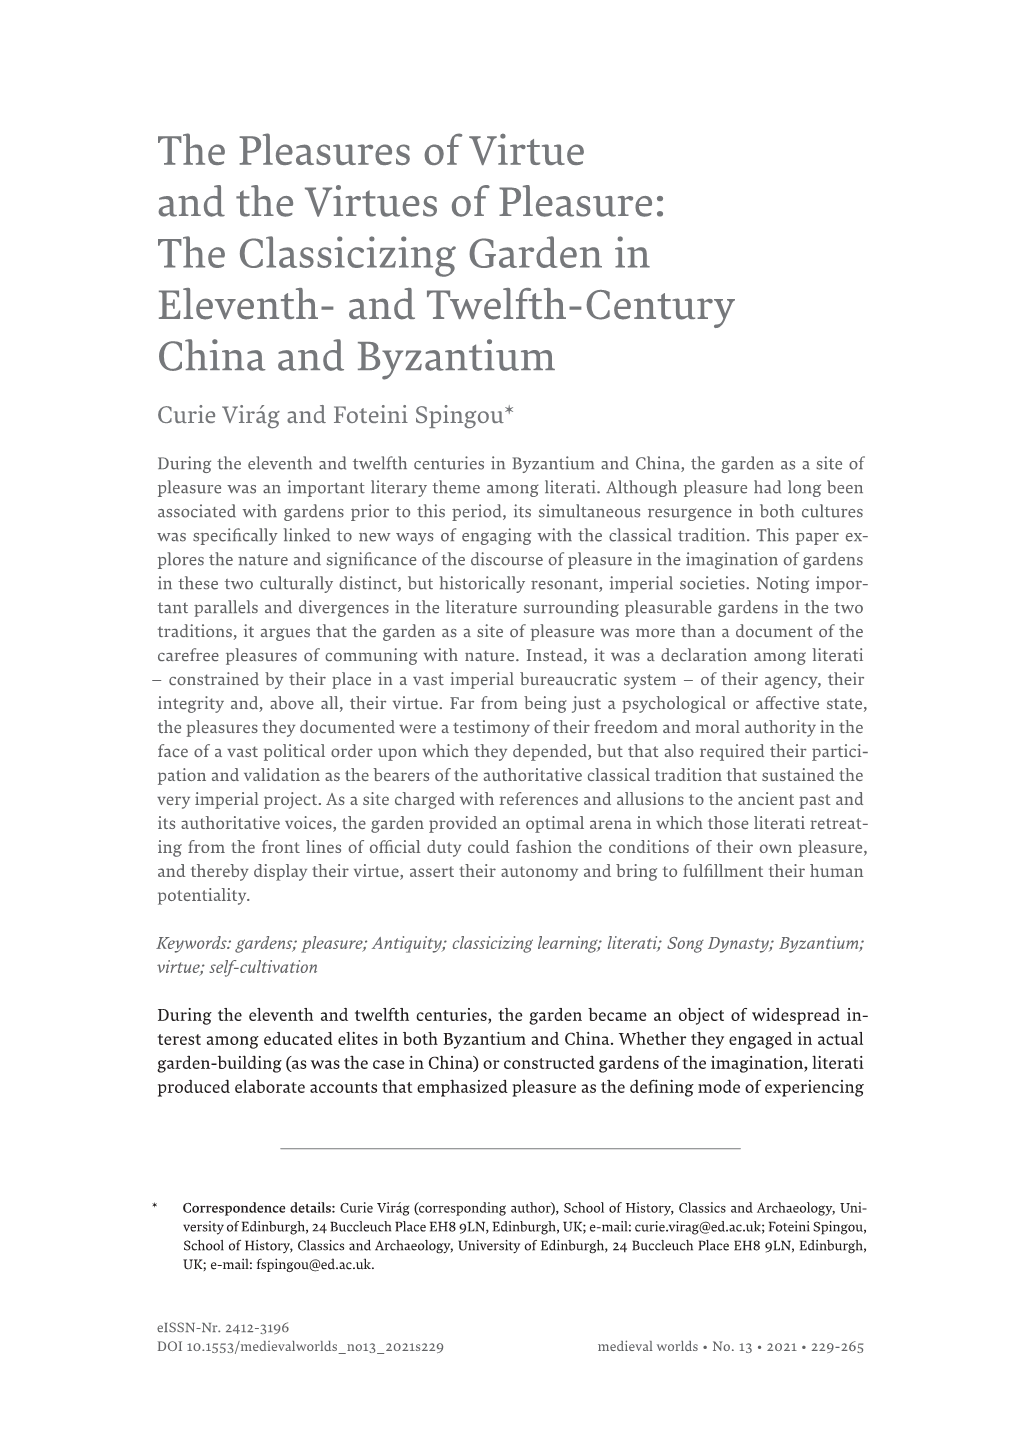 The Classicizing Garden in Eleventh- and Twelfth-Century China and Byzantium